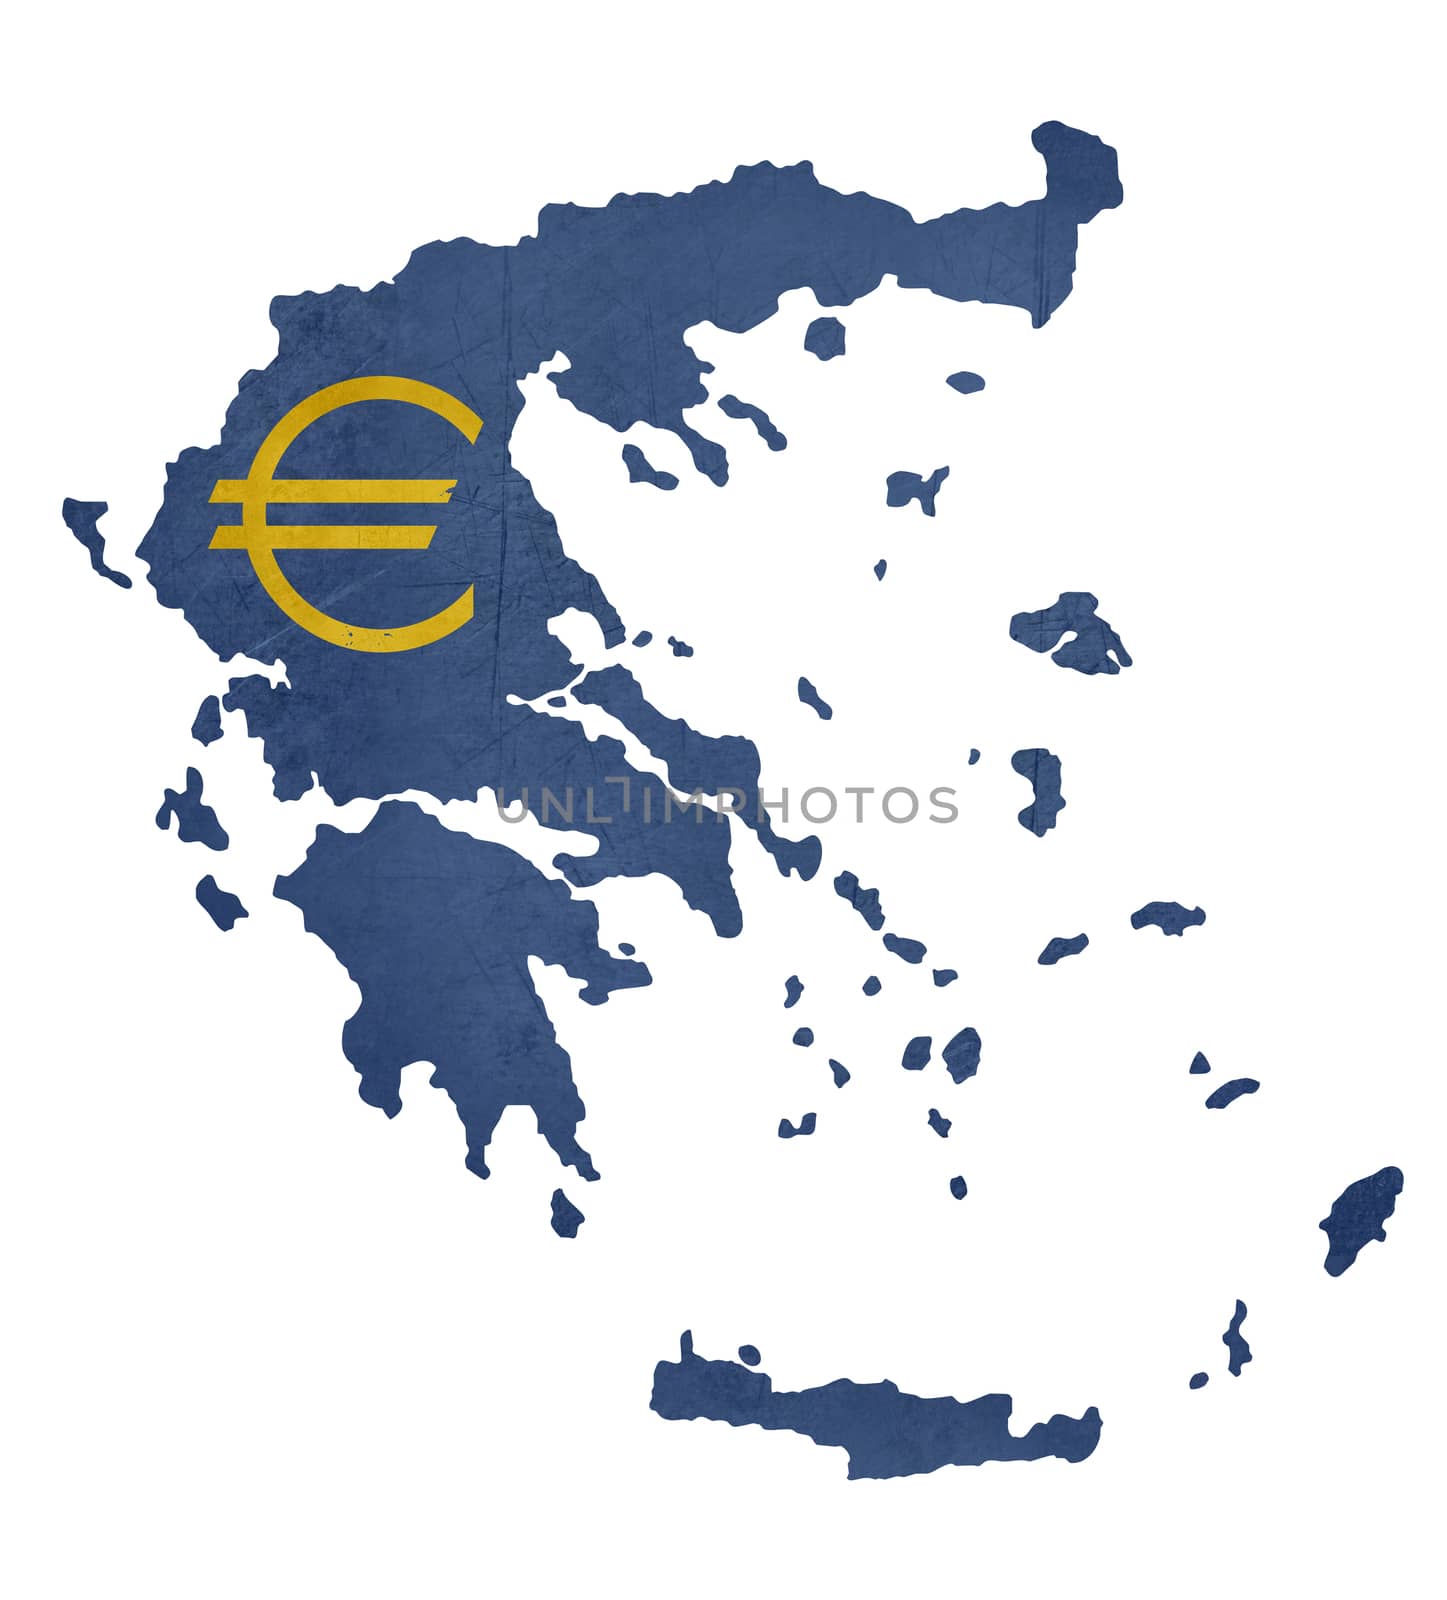 European currency symbol on map of Greece isolated on white background.